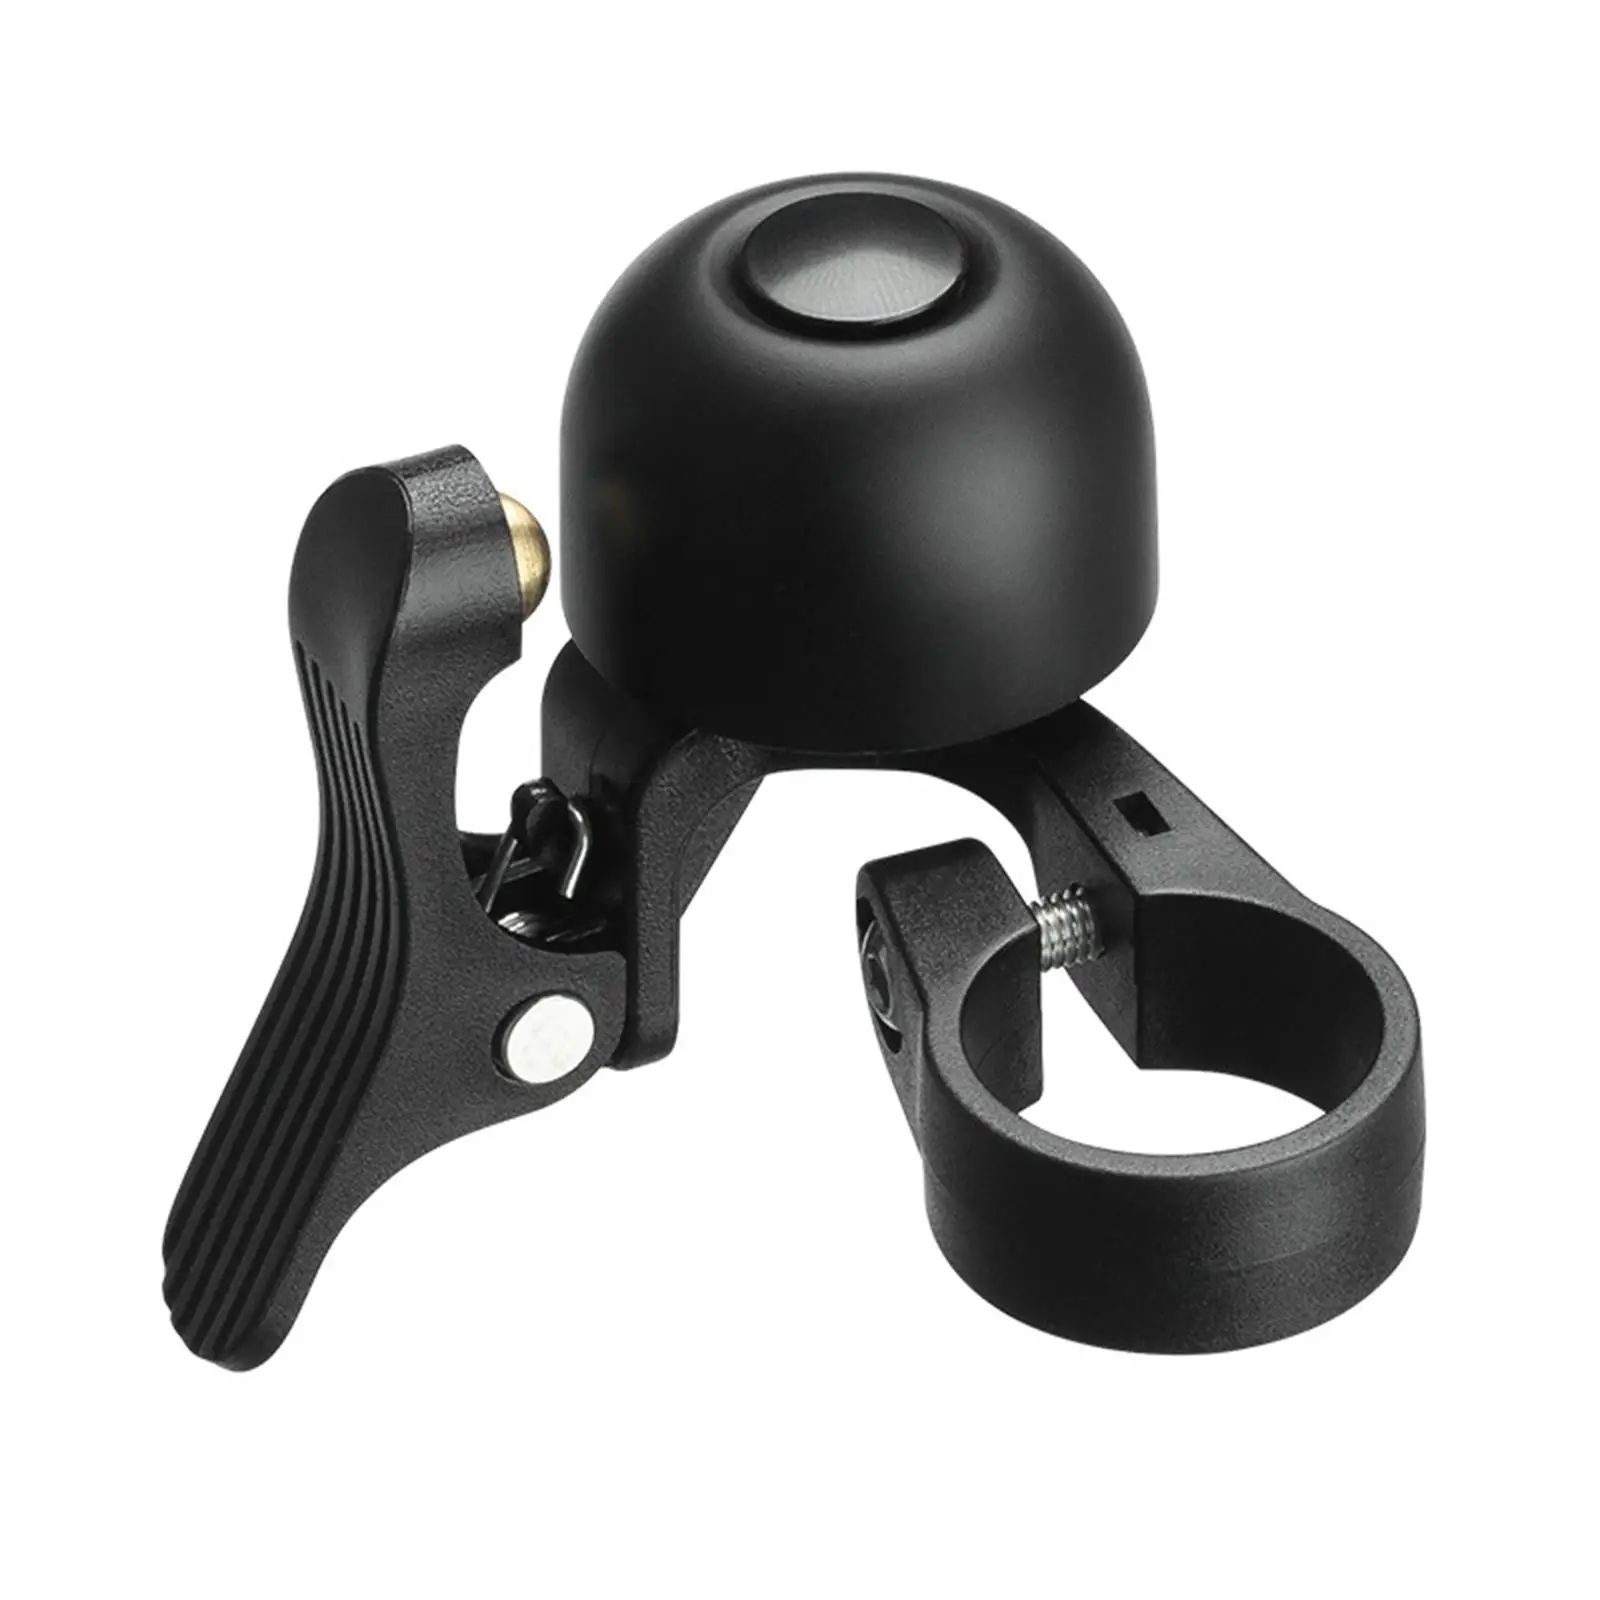 Bicycle Bell Bike Bell Small Portable Kids Adults Loud Ringing Sound Bicycle